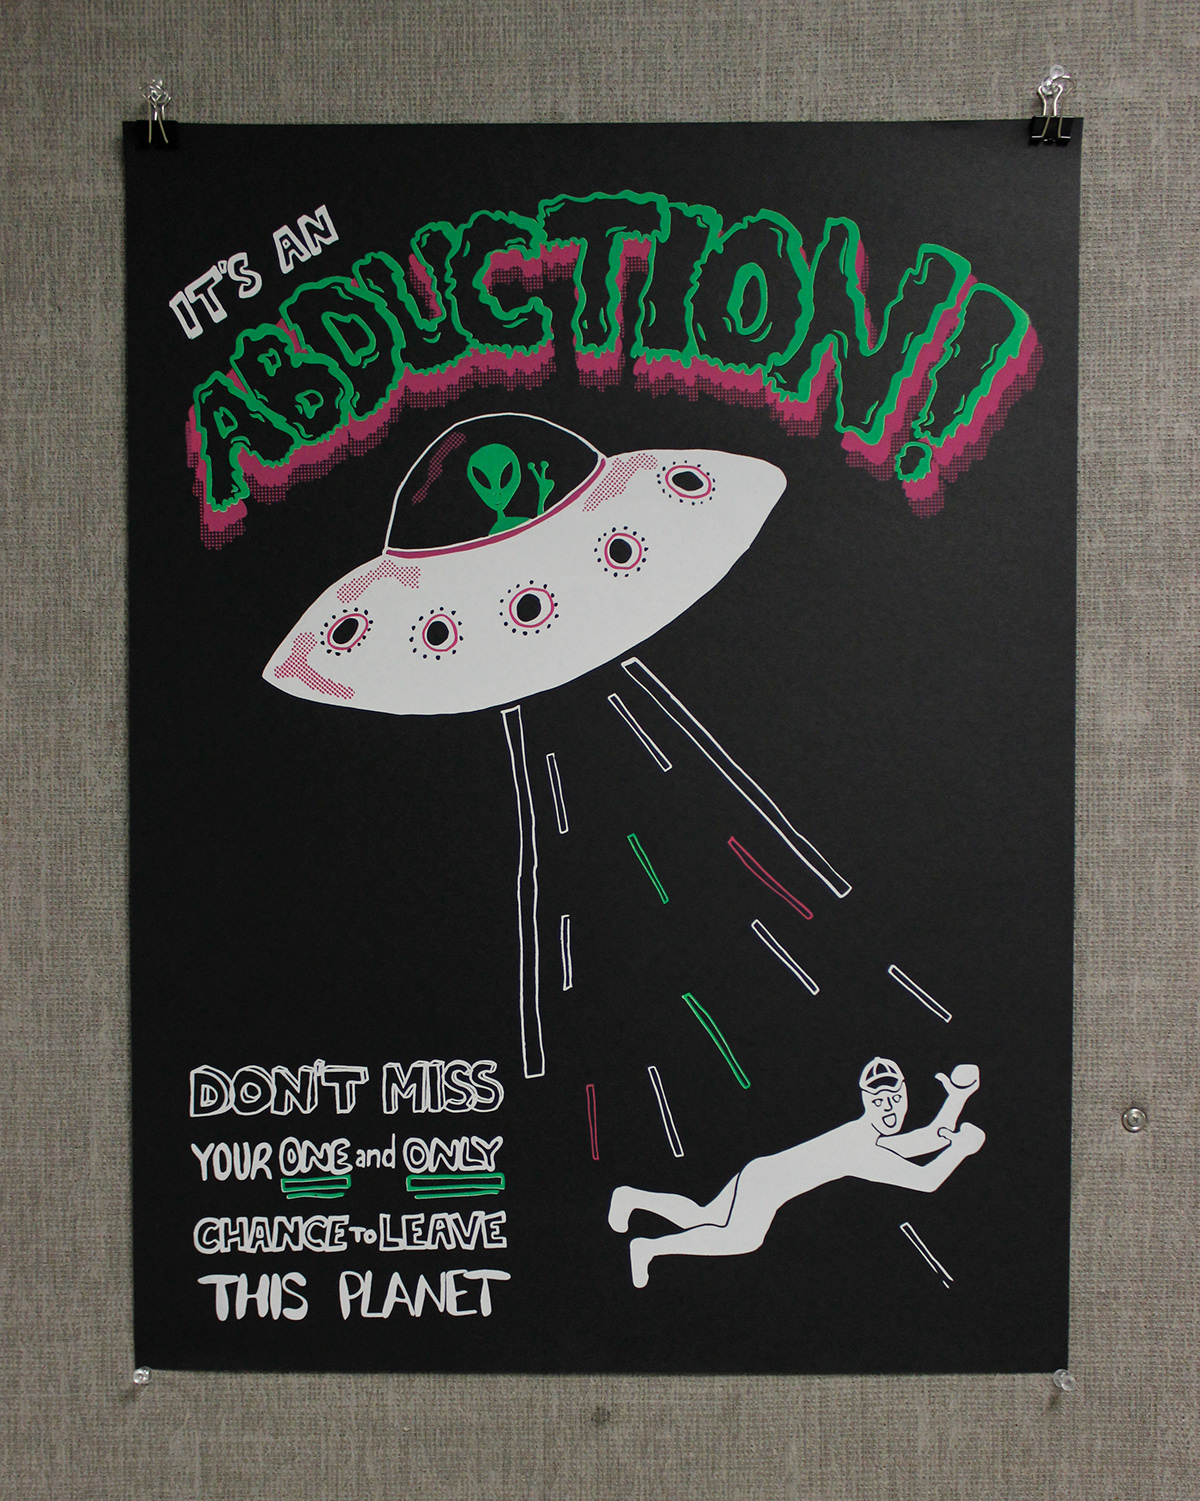 It's an abduction! on Behance